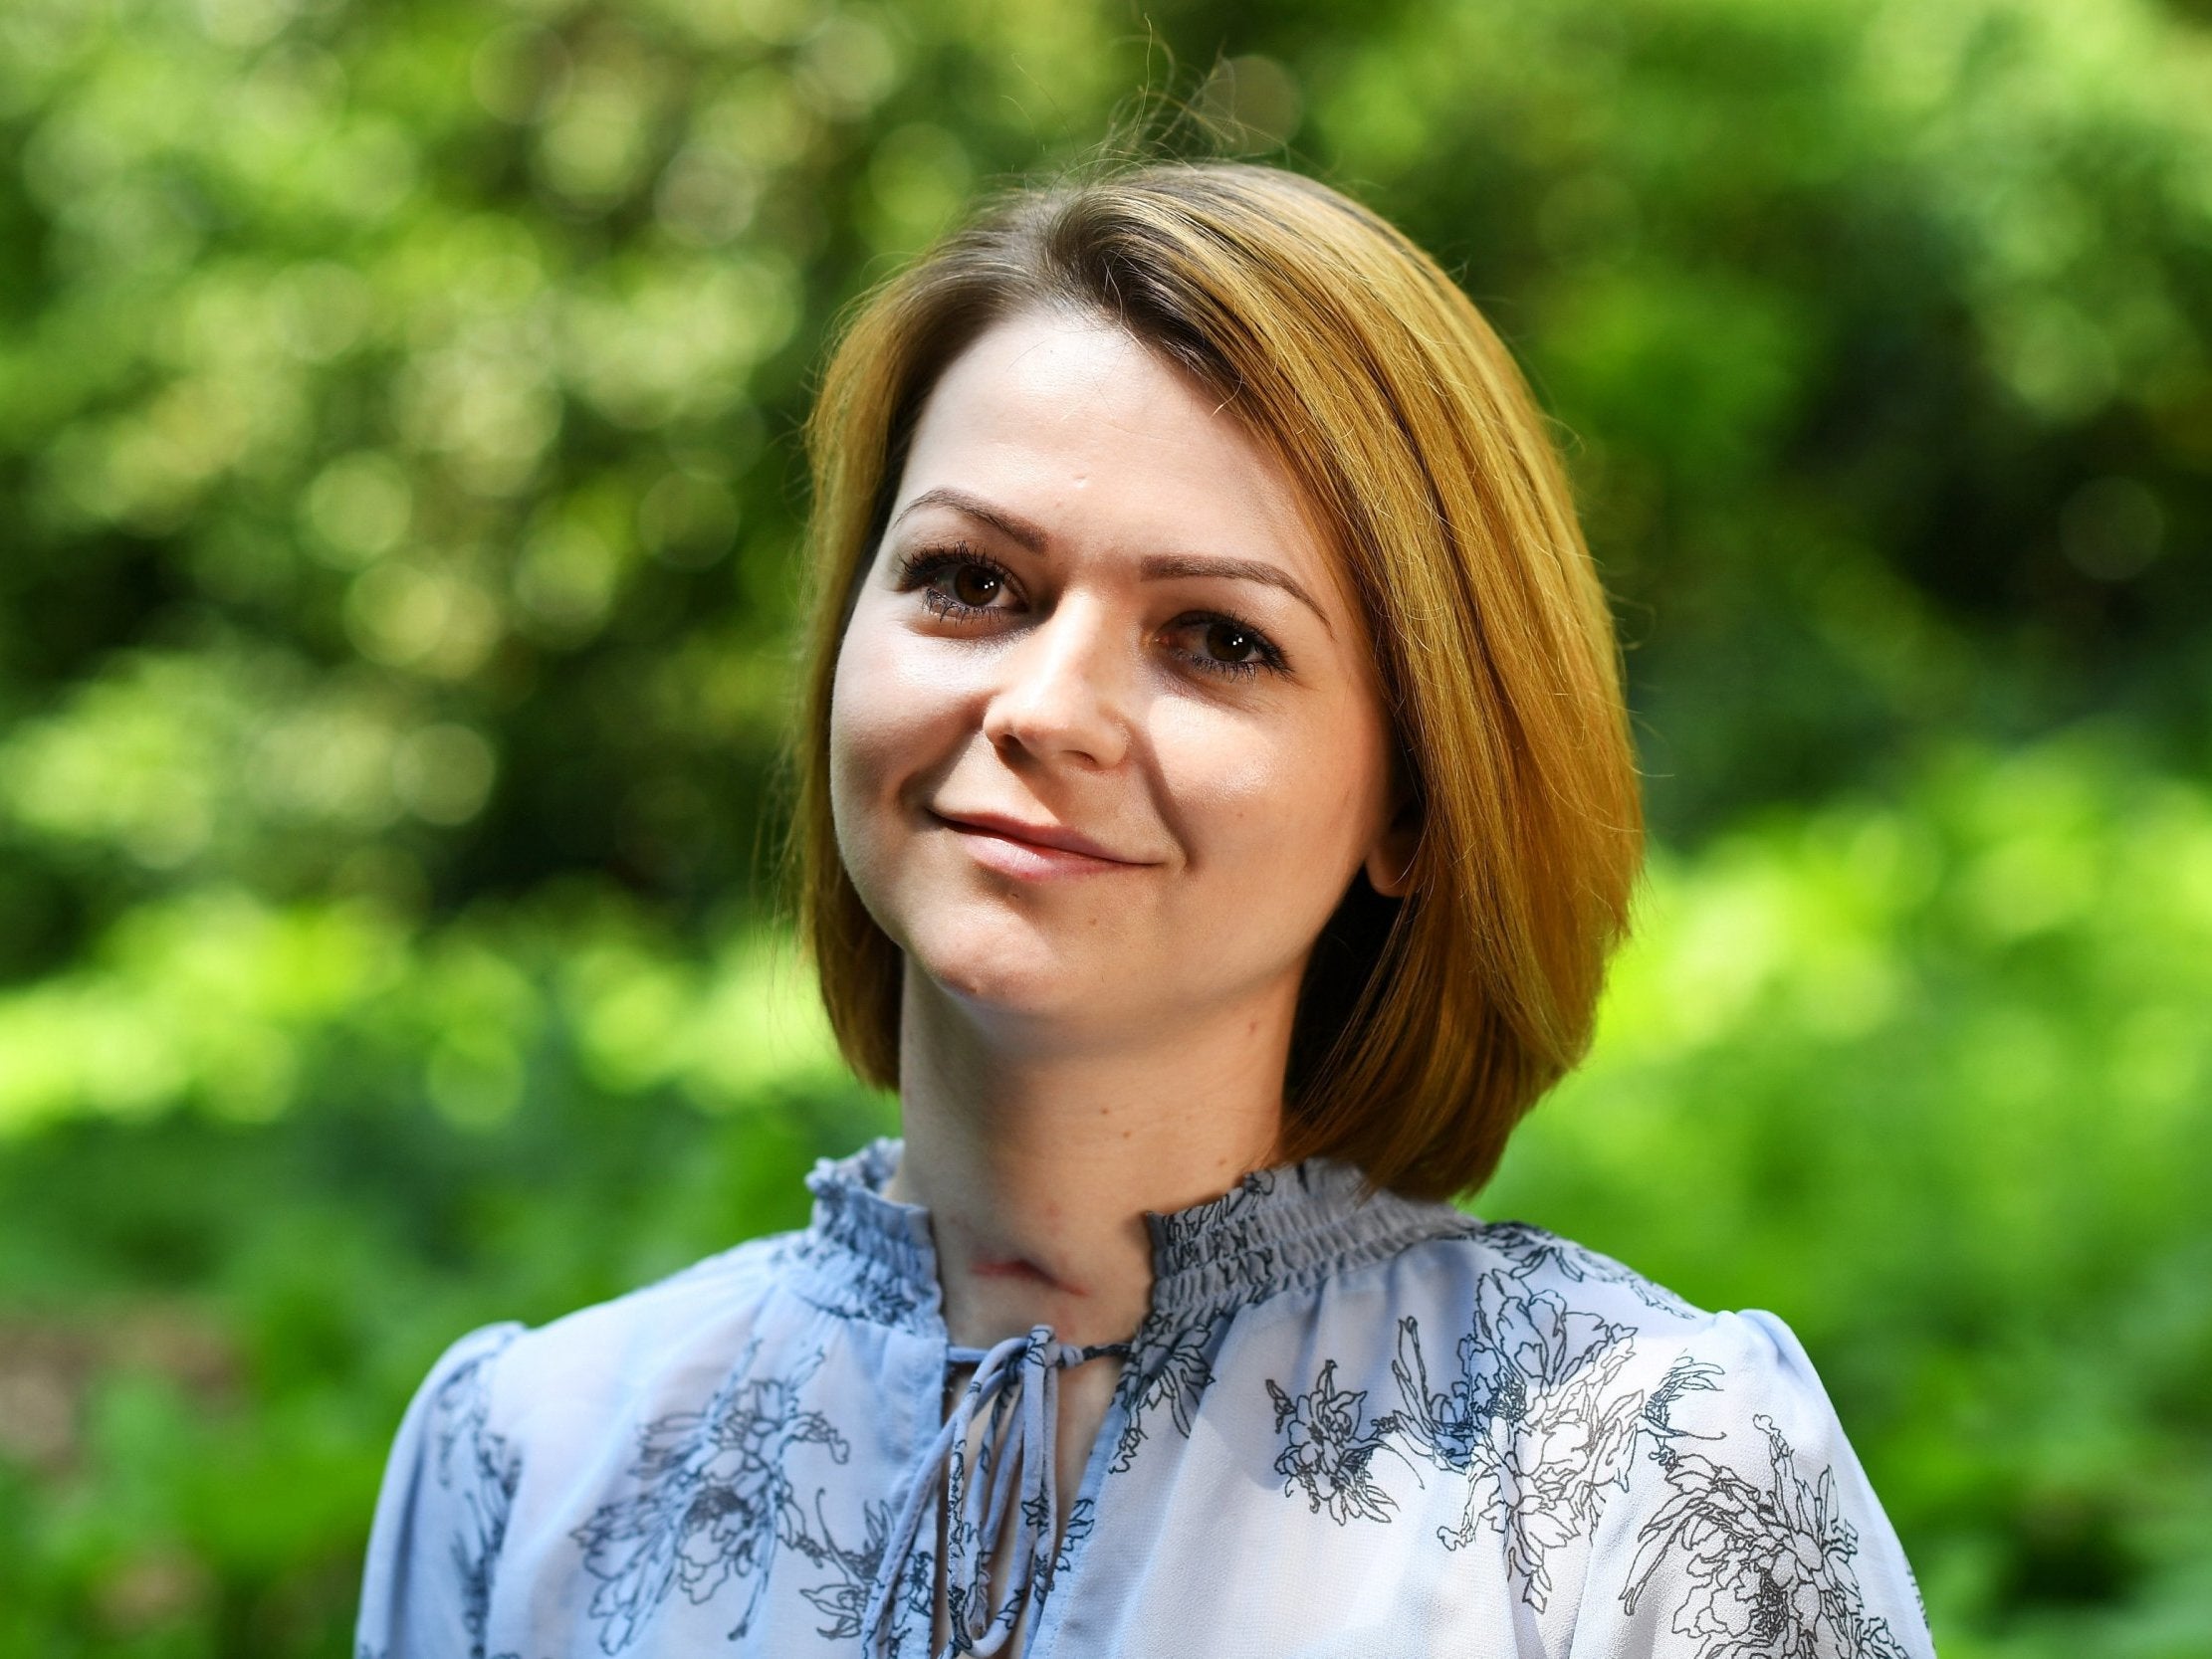 Yulia Skripal's email account was targeted by Russia's intelligence agency, the British government said